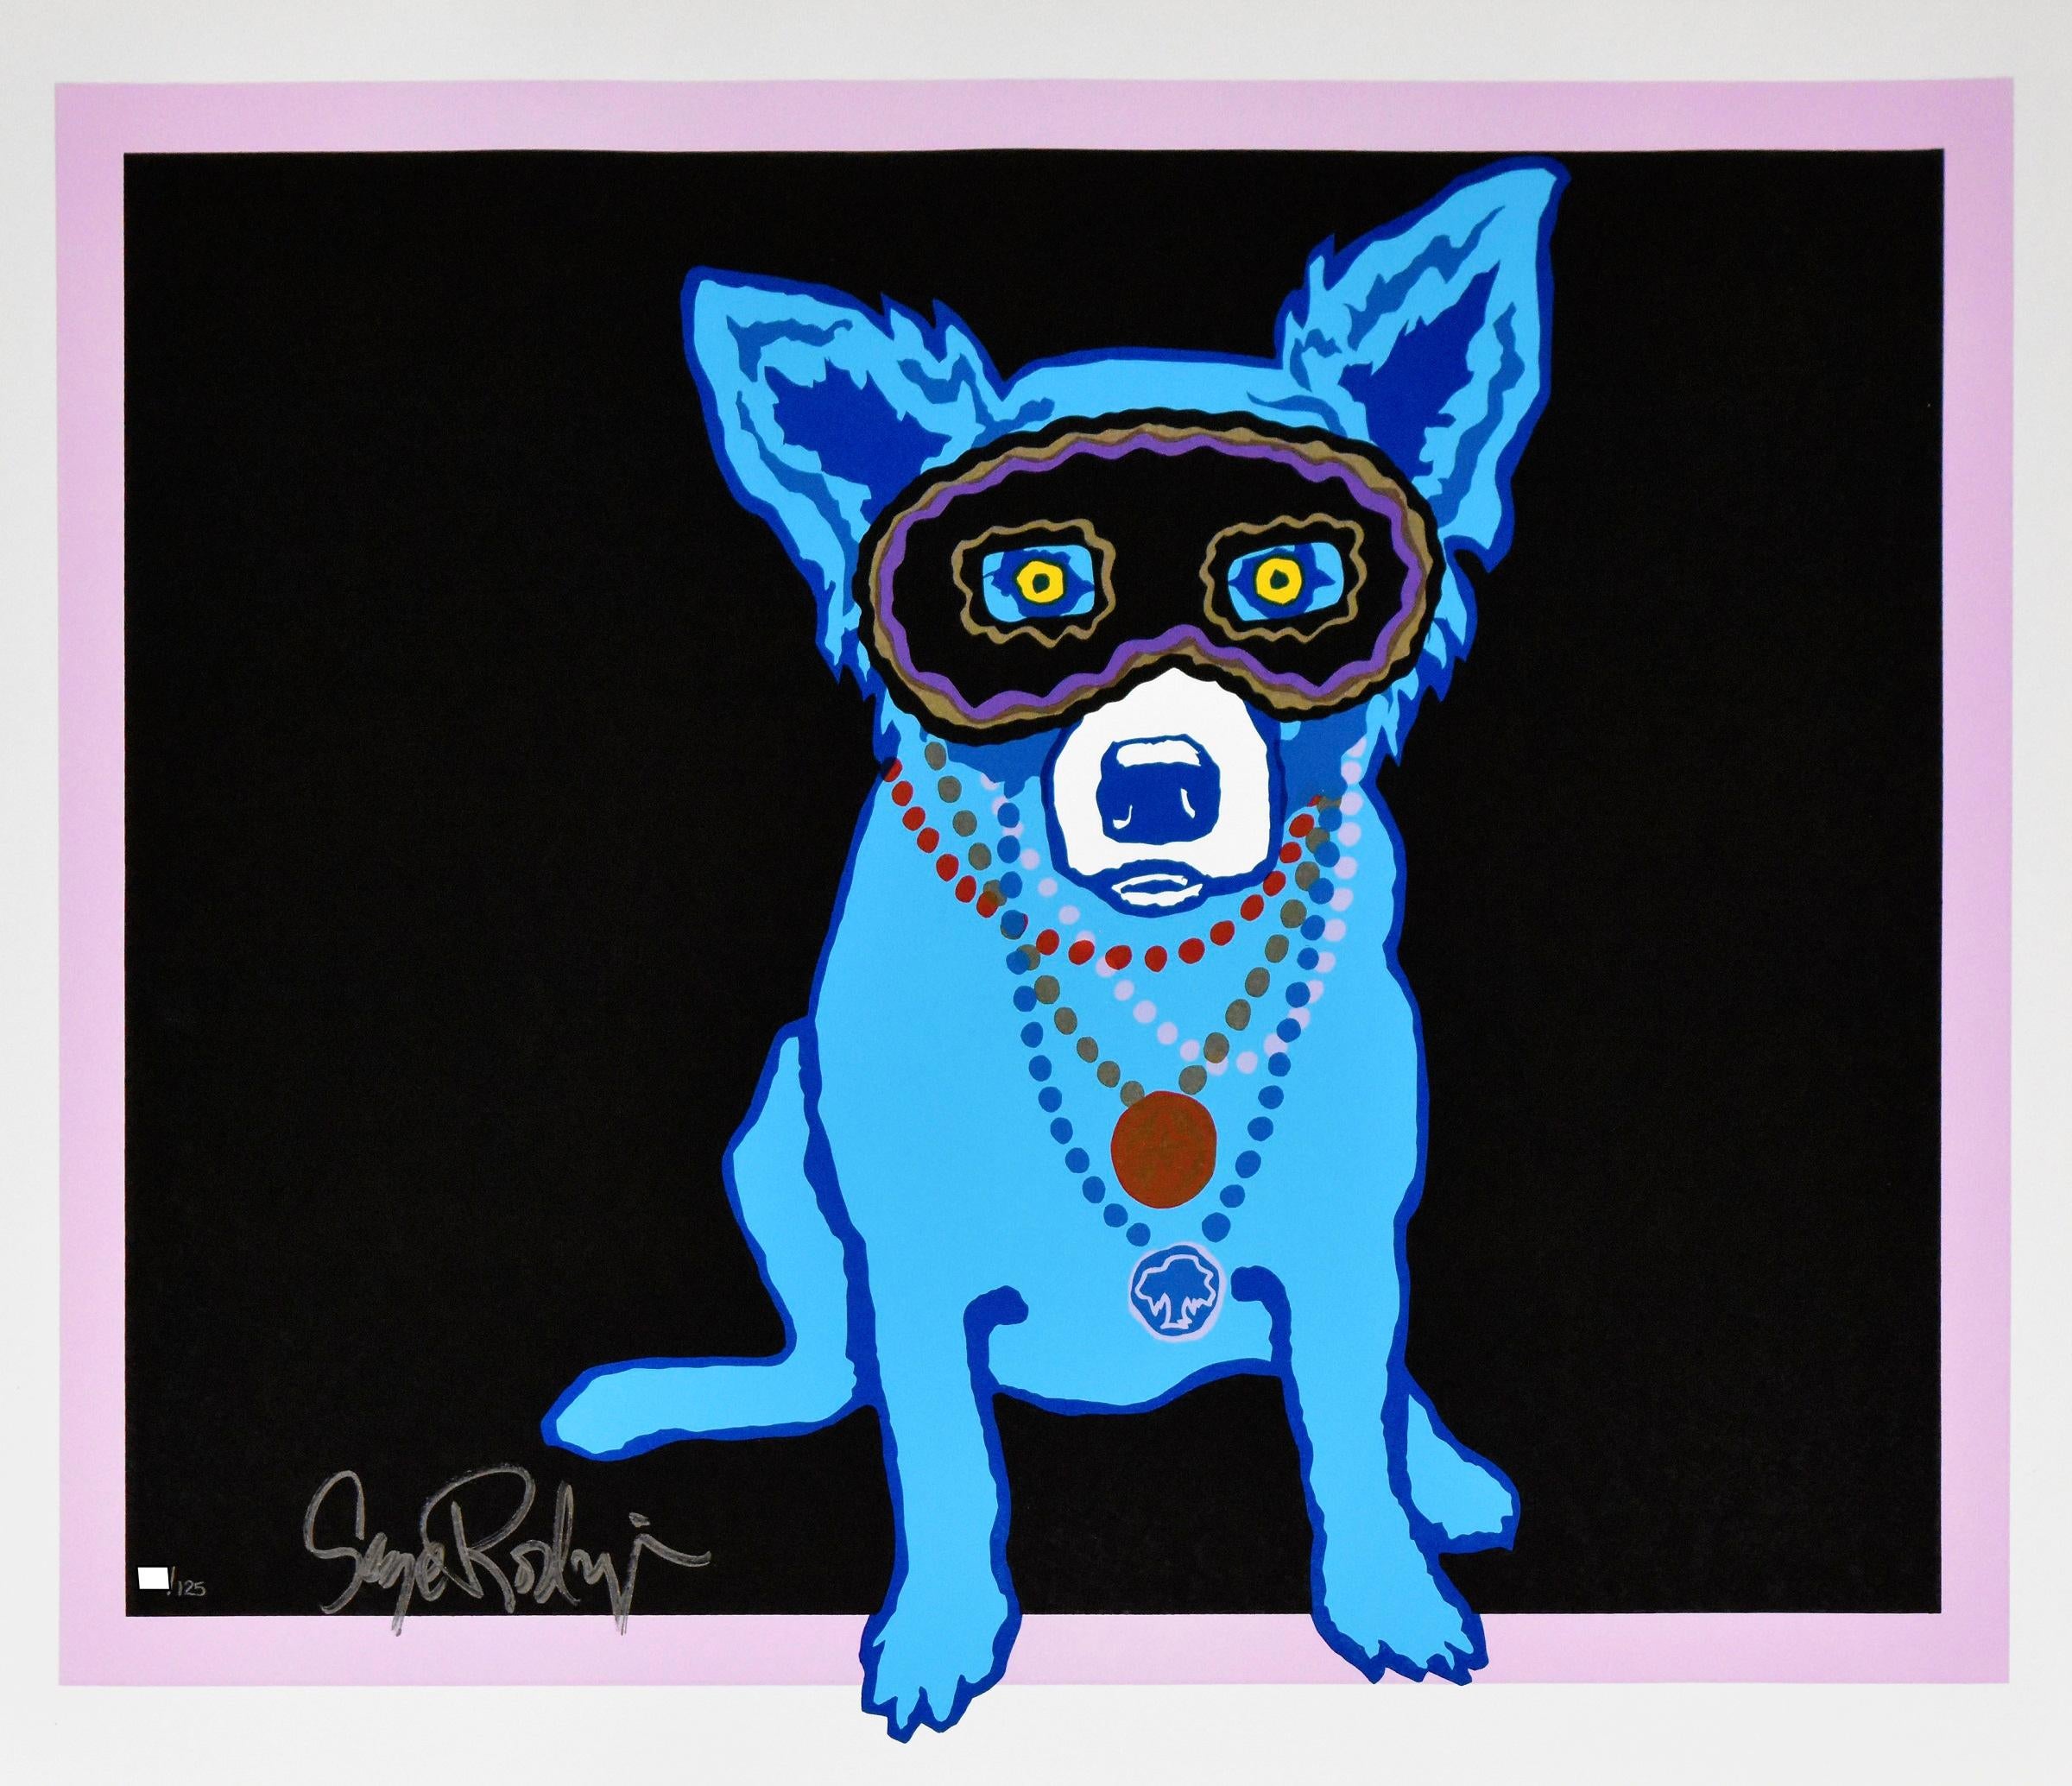 This Blue Dog work consists of a black background with a thick pink border.  In the center is a single blue dog wearing 4 chains of various colors and medallions and a black with purple trim eye mask ready to celebrate MARDI GRAS 